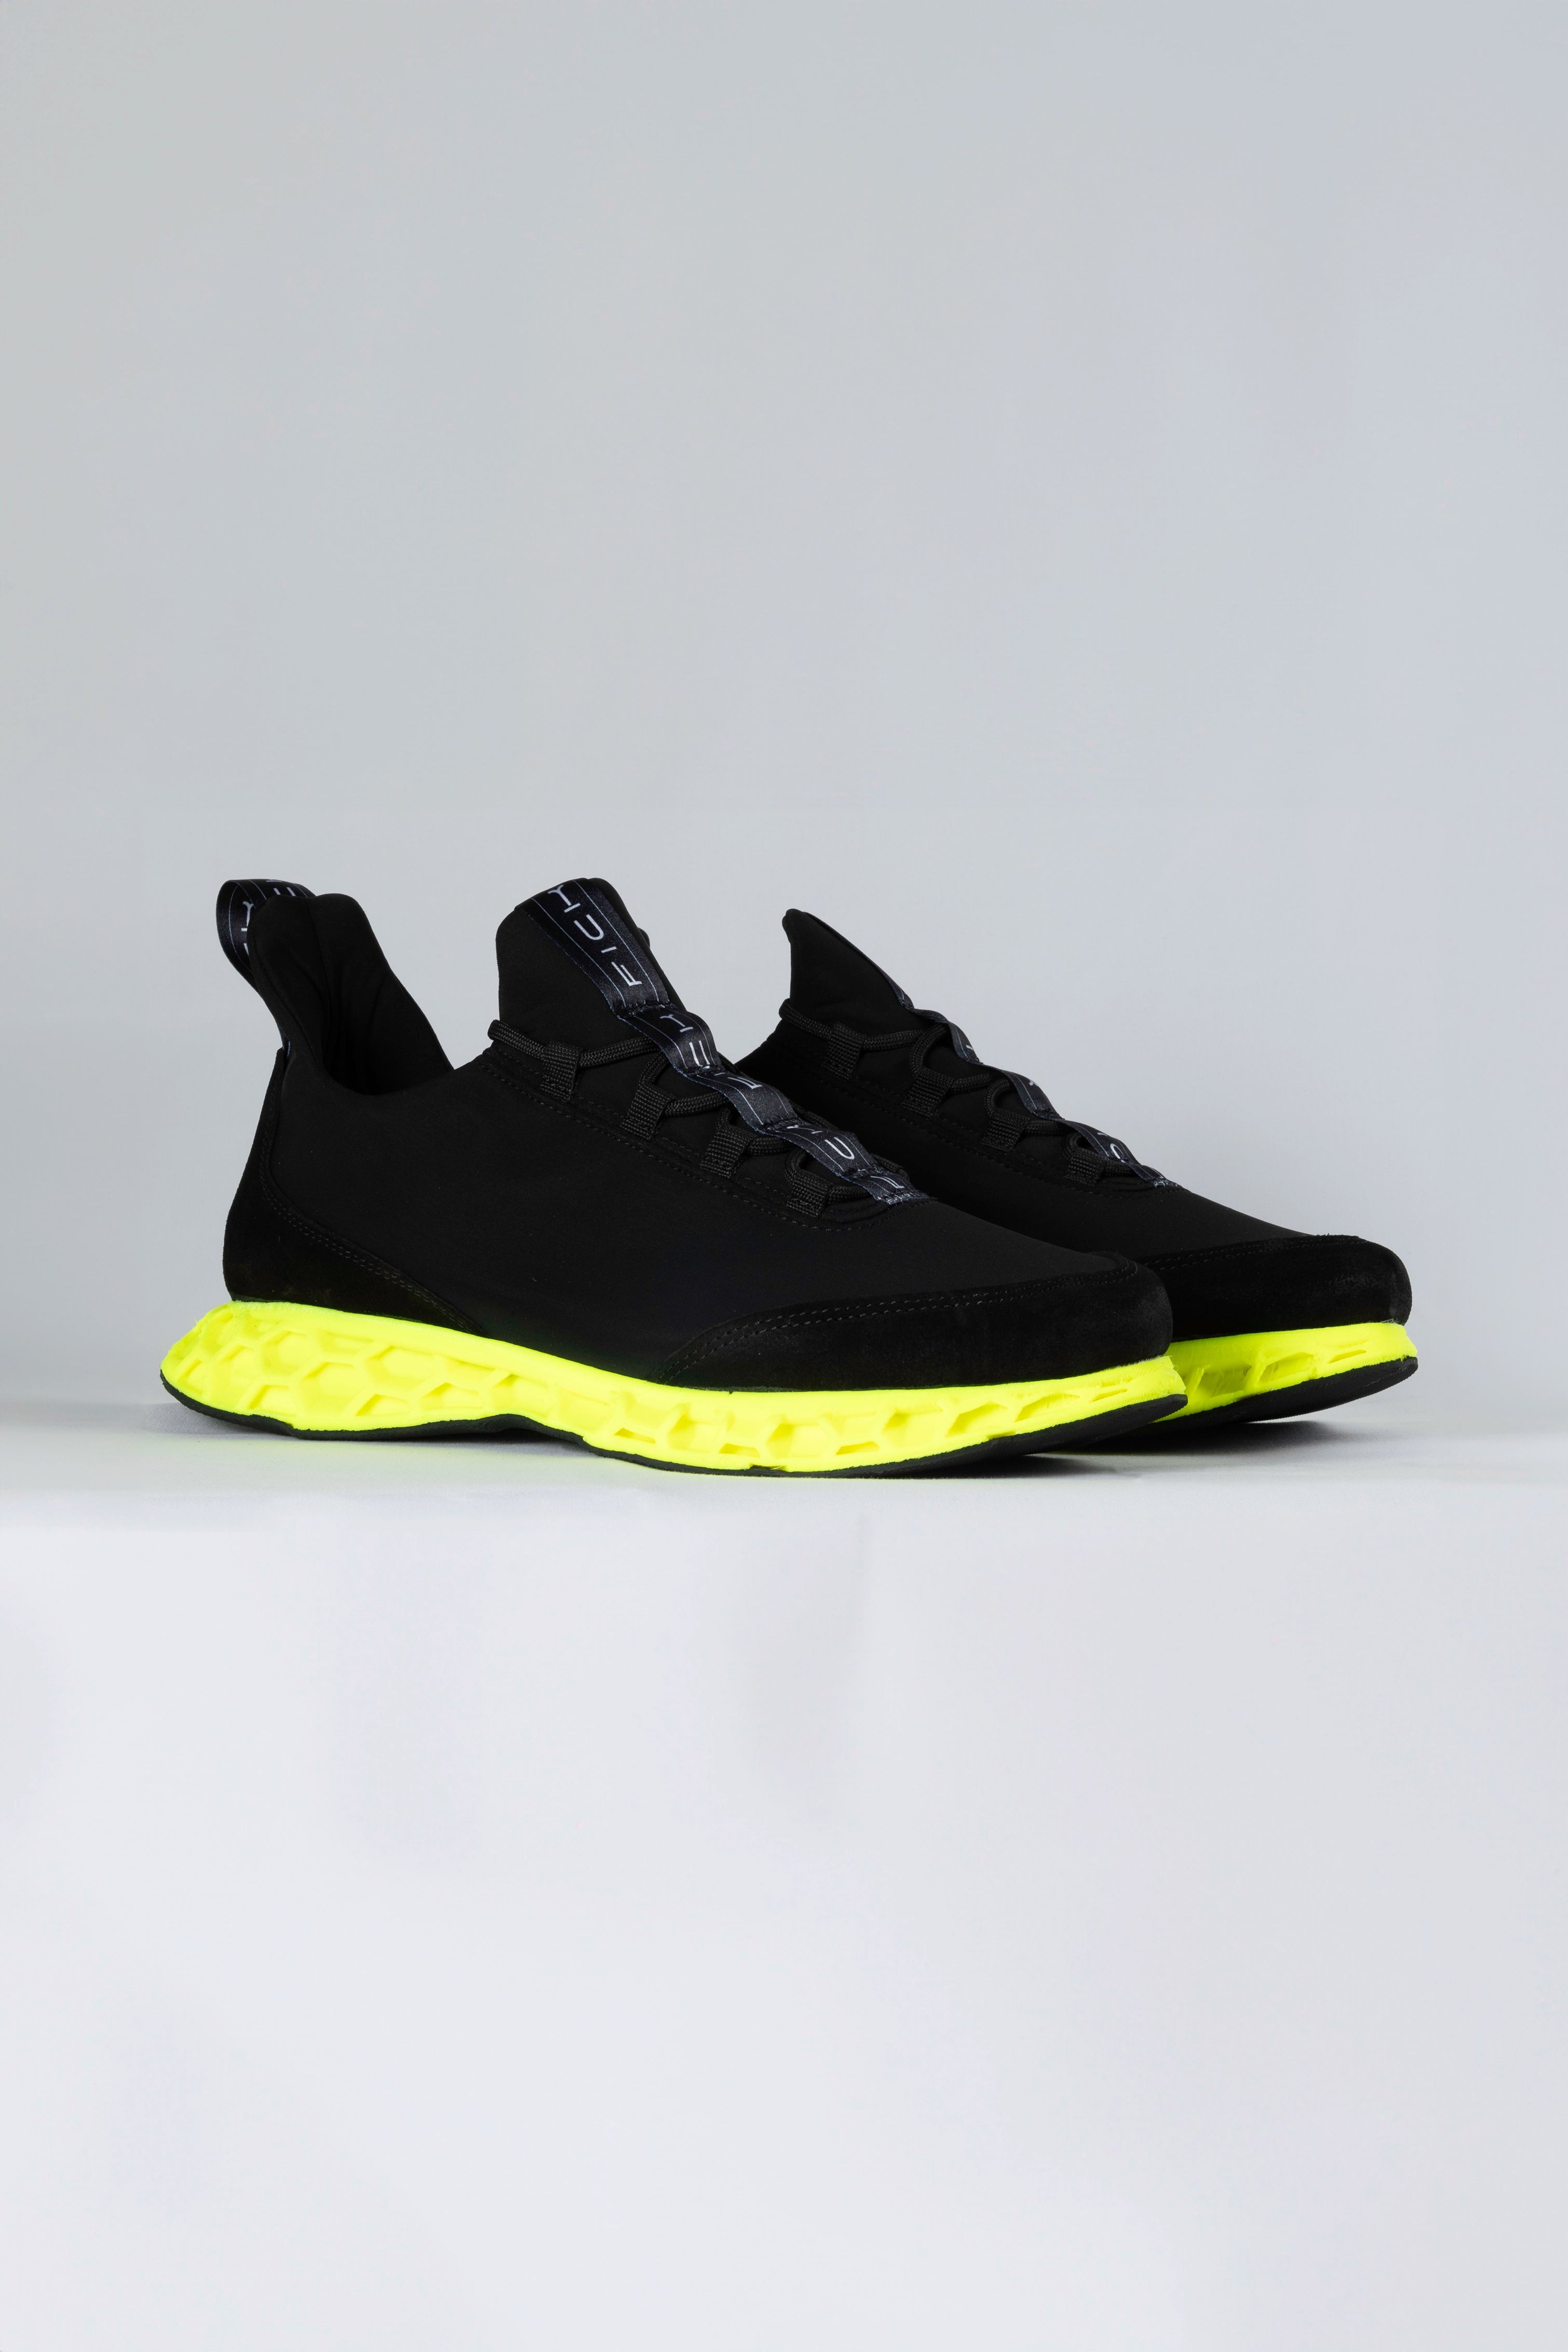 Bee System Black - Neo Yellow Sole